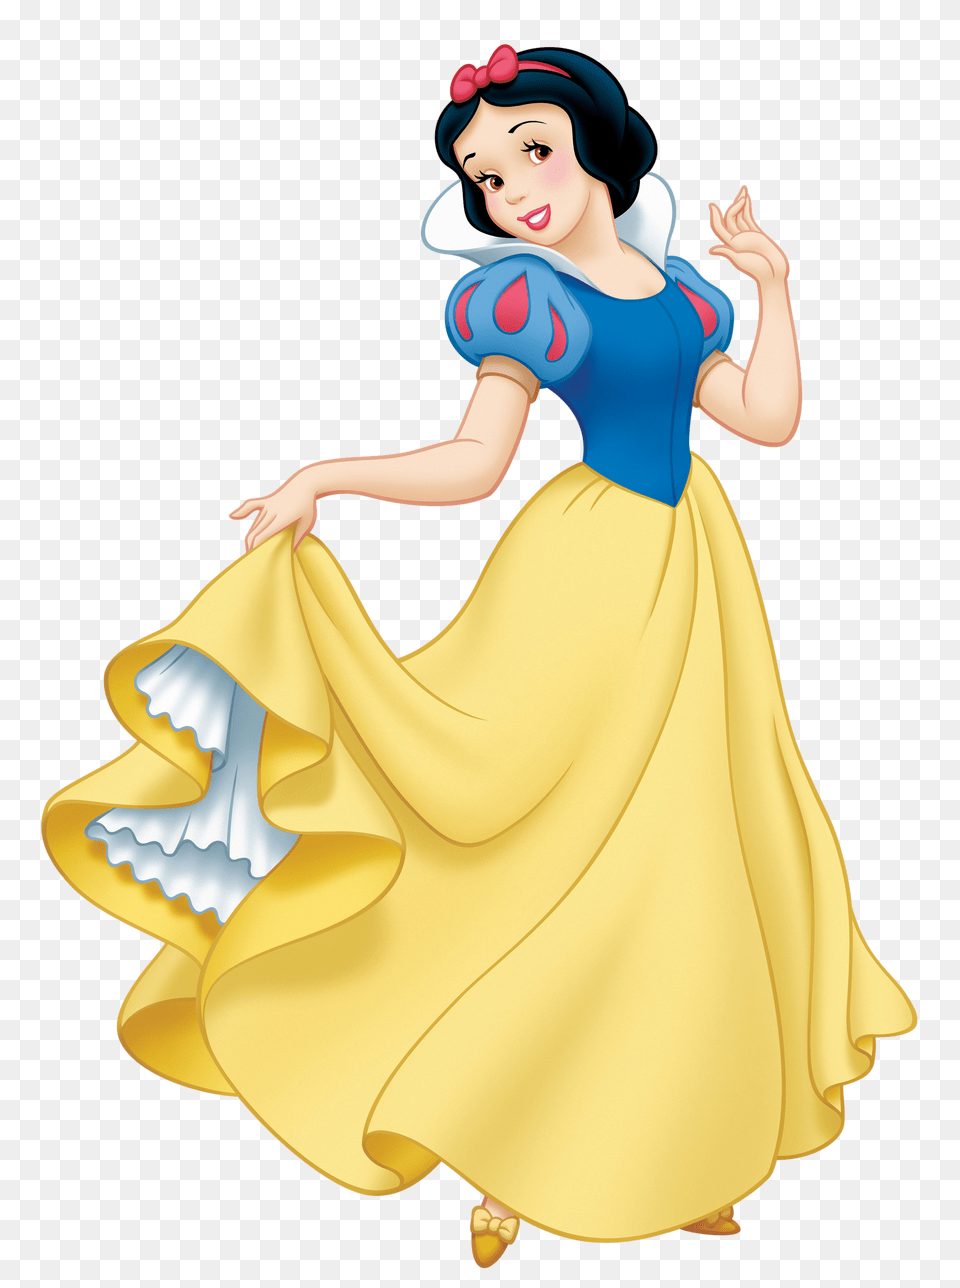 Snow White Dress Cartoon, Clothing, Costume, Person, Dancing Png Image